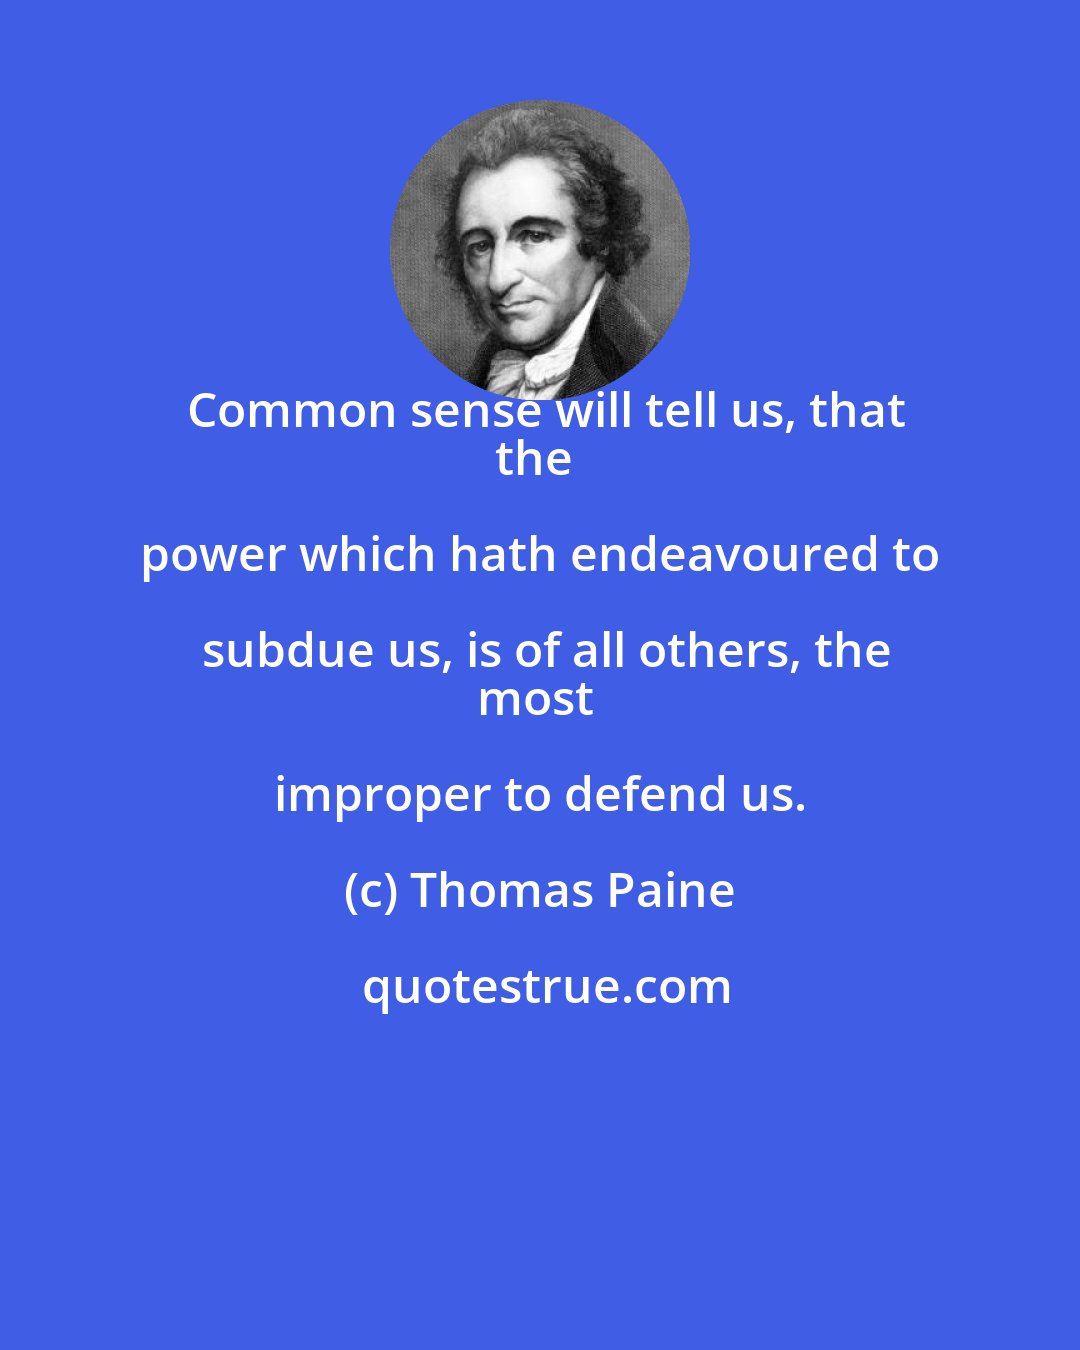 Thomas Paine: Common sense will tell us, that
the power which hath endeavoured to subdue us, is of all others, the
most improper to defend us.